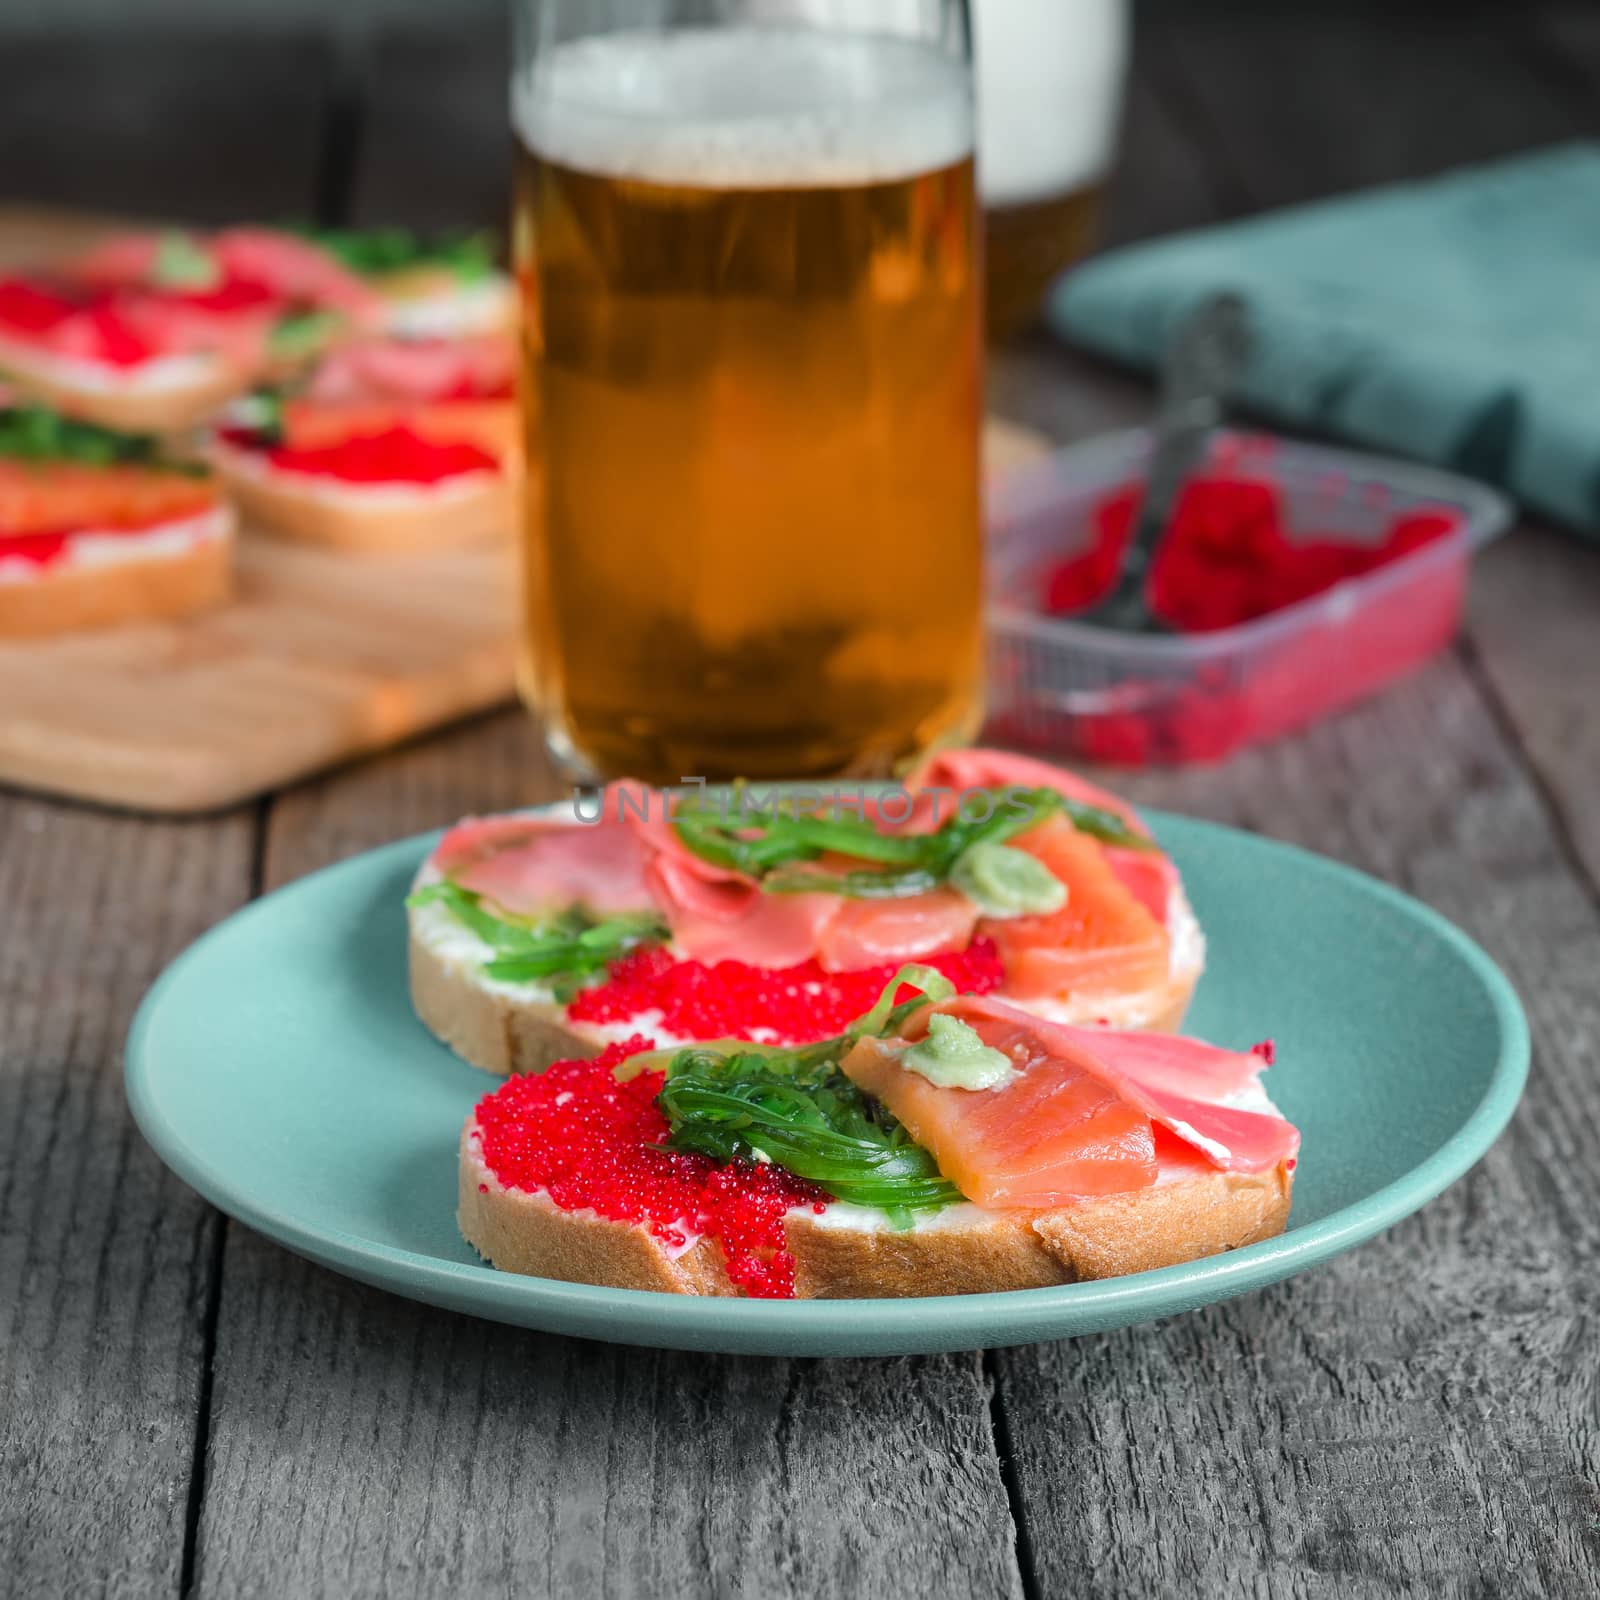 Sandwiches with seafood and beer by Gaina